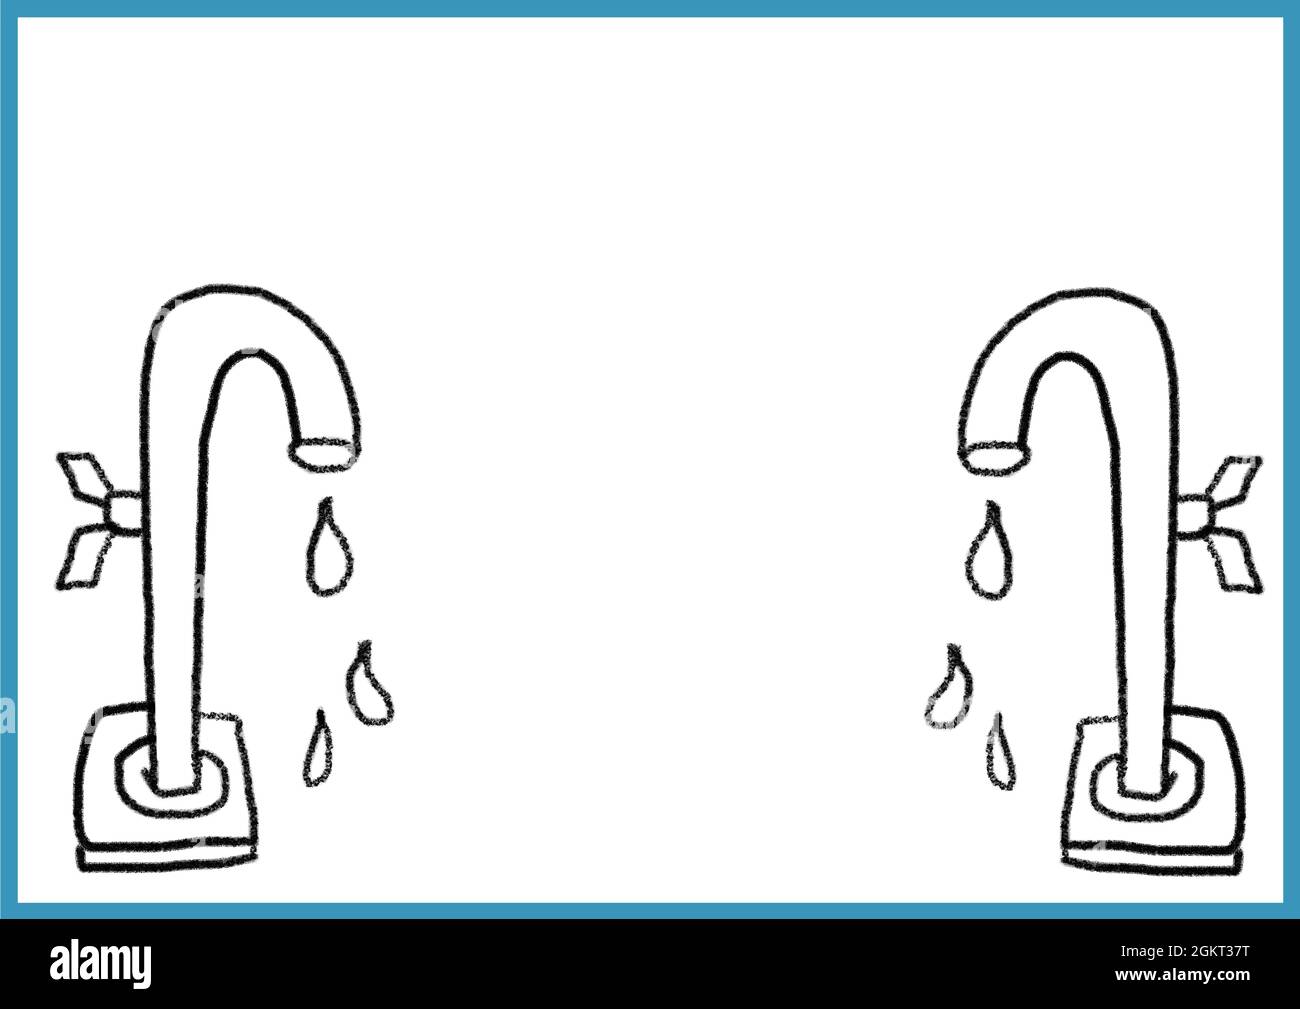 Digitally generated image of two faucet icons against white background Stock Photo